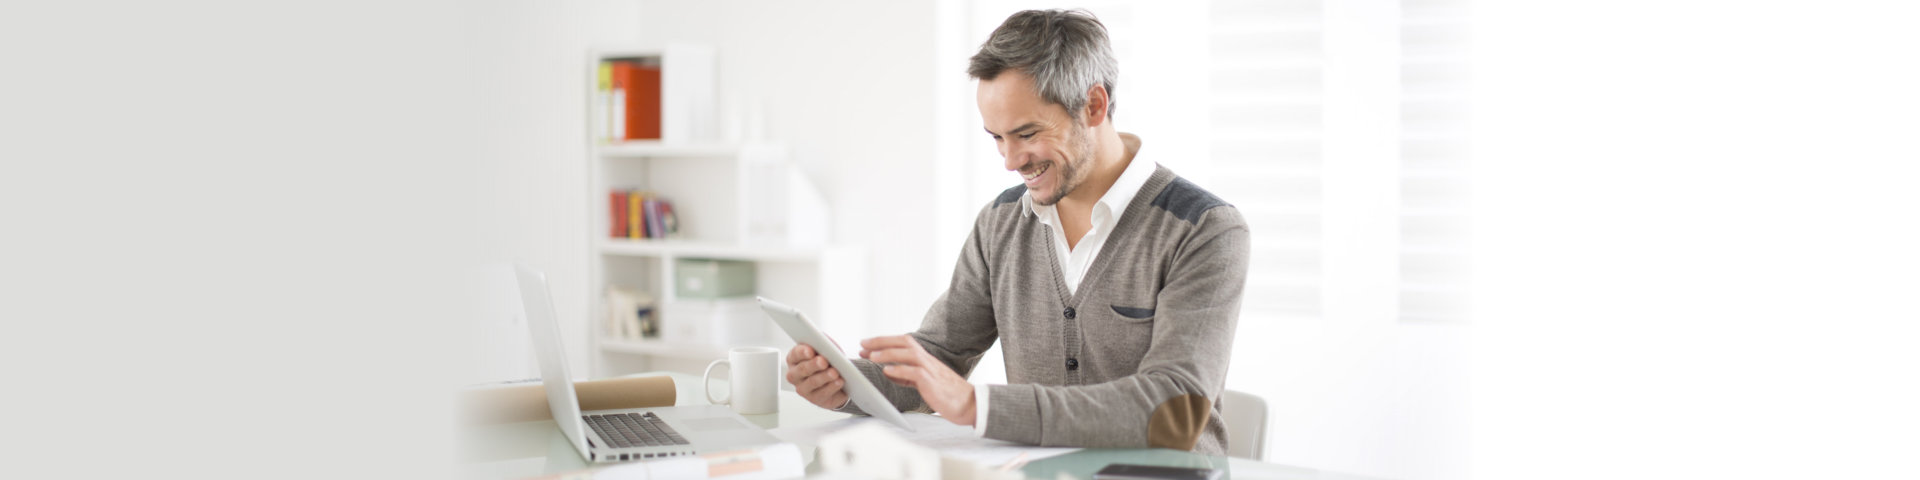 adult man smiling using tablet